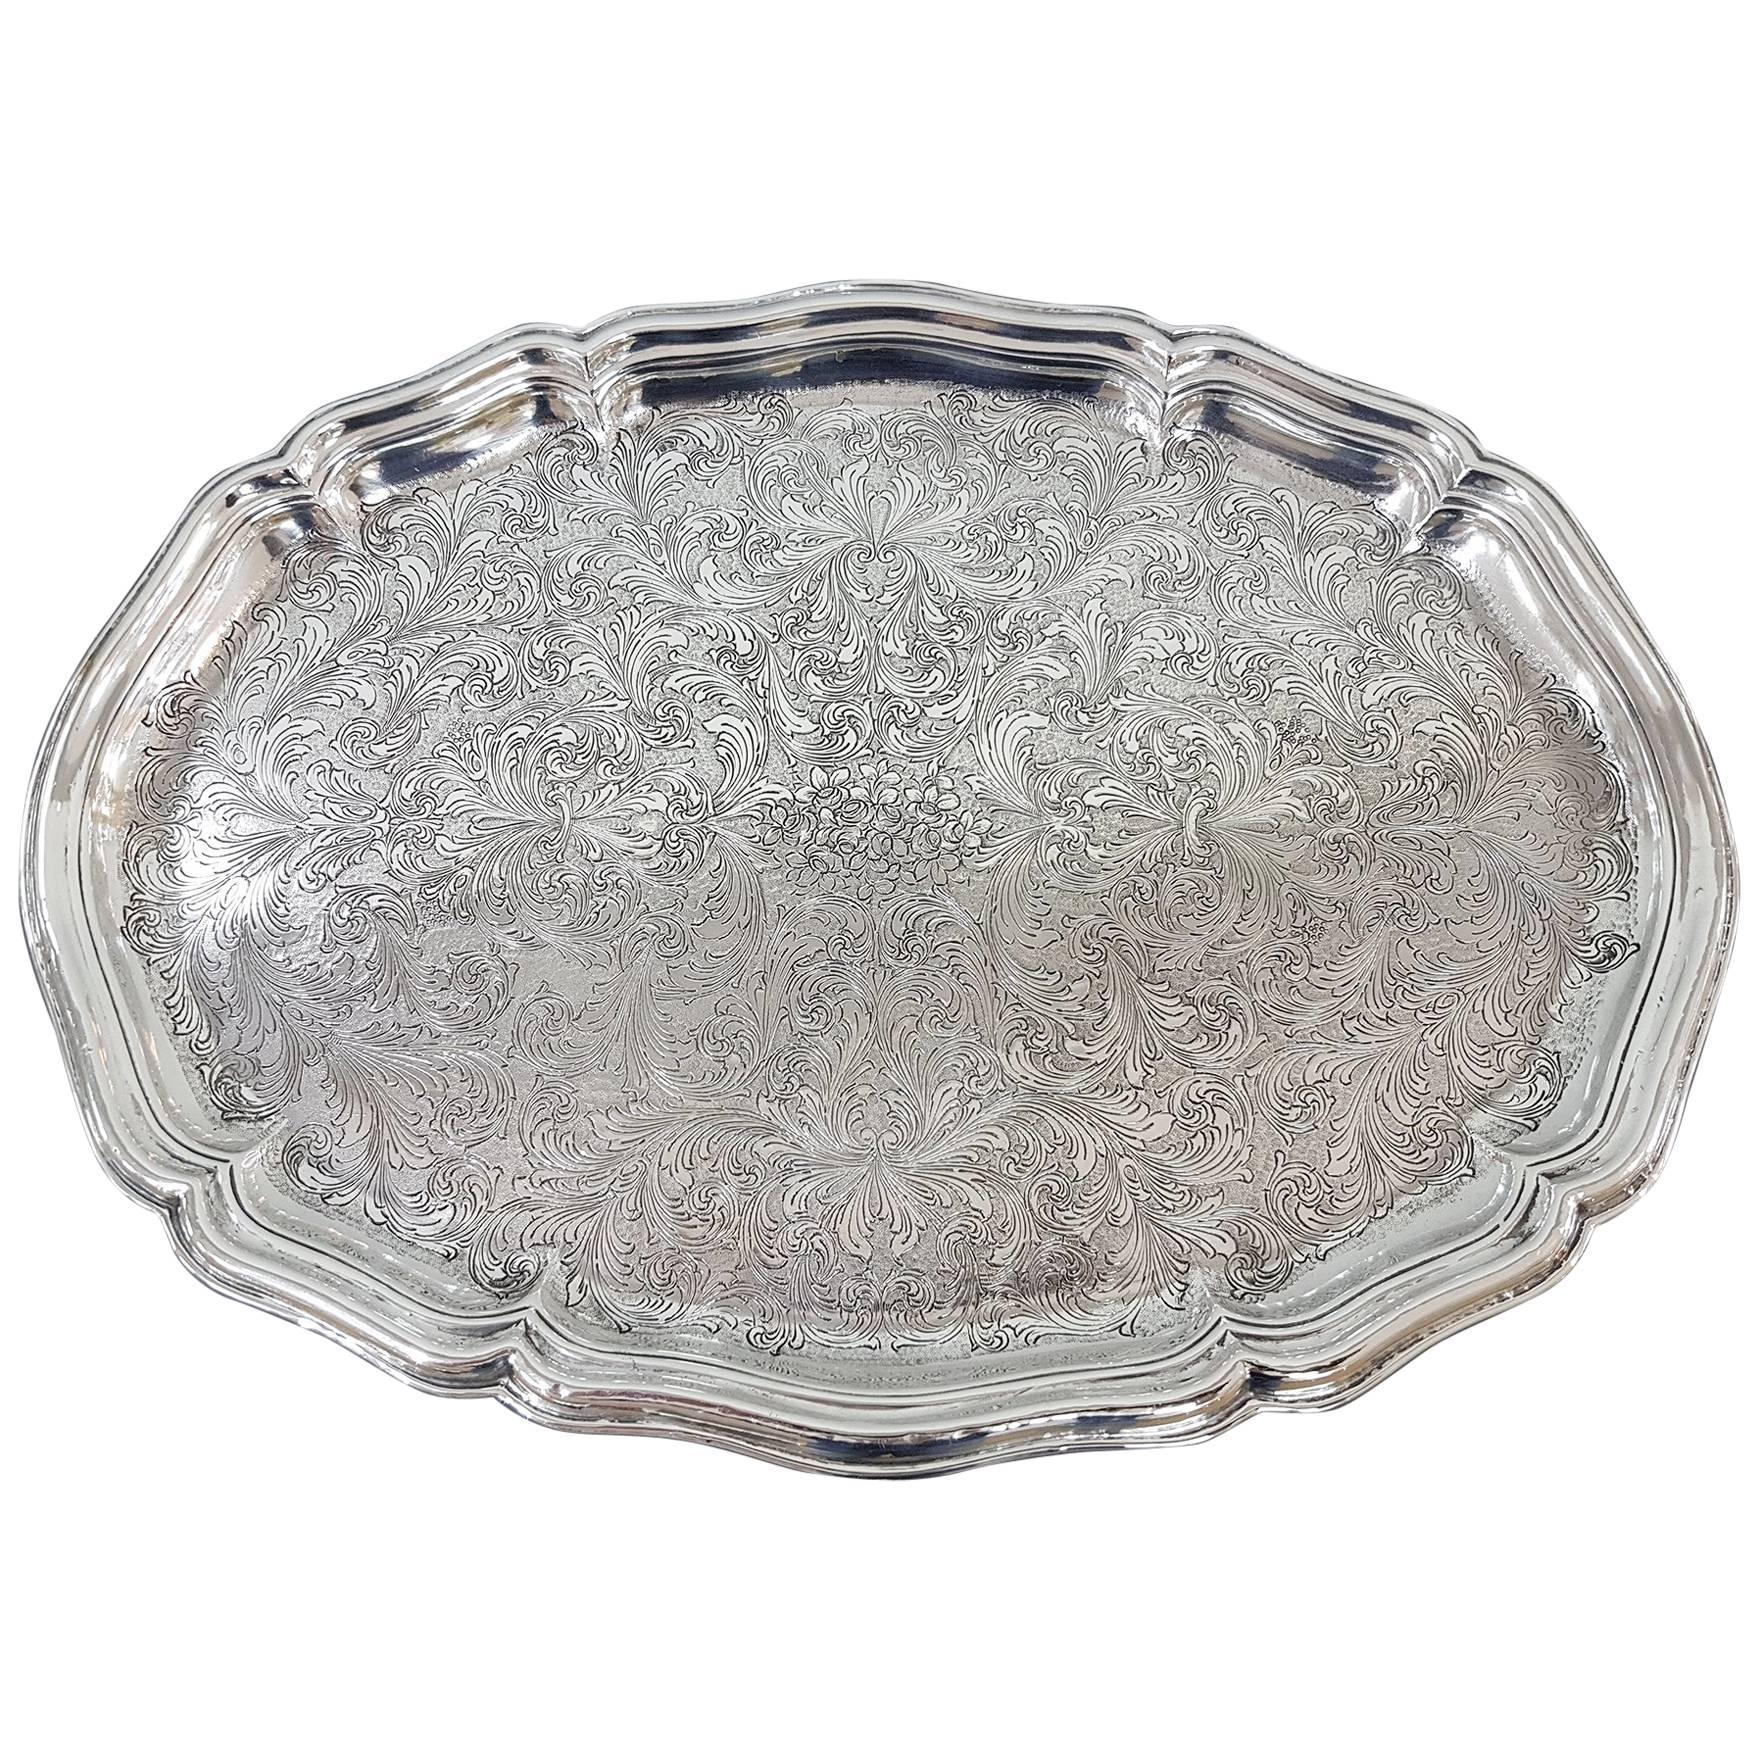 19th Century Italian Silver Oval Baroque Tray, Completely Engraved by Hand For Sale